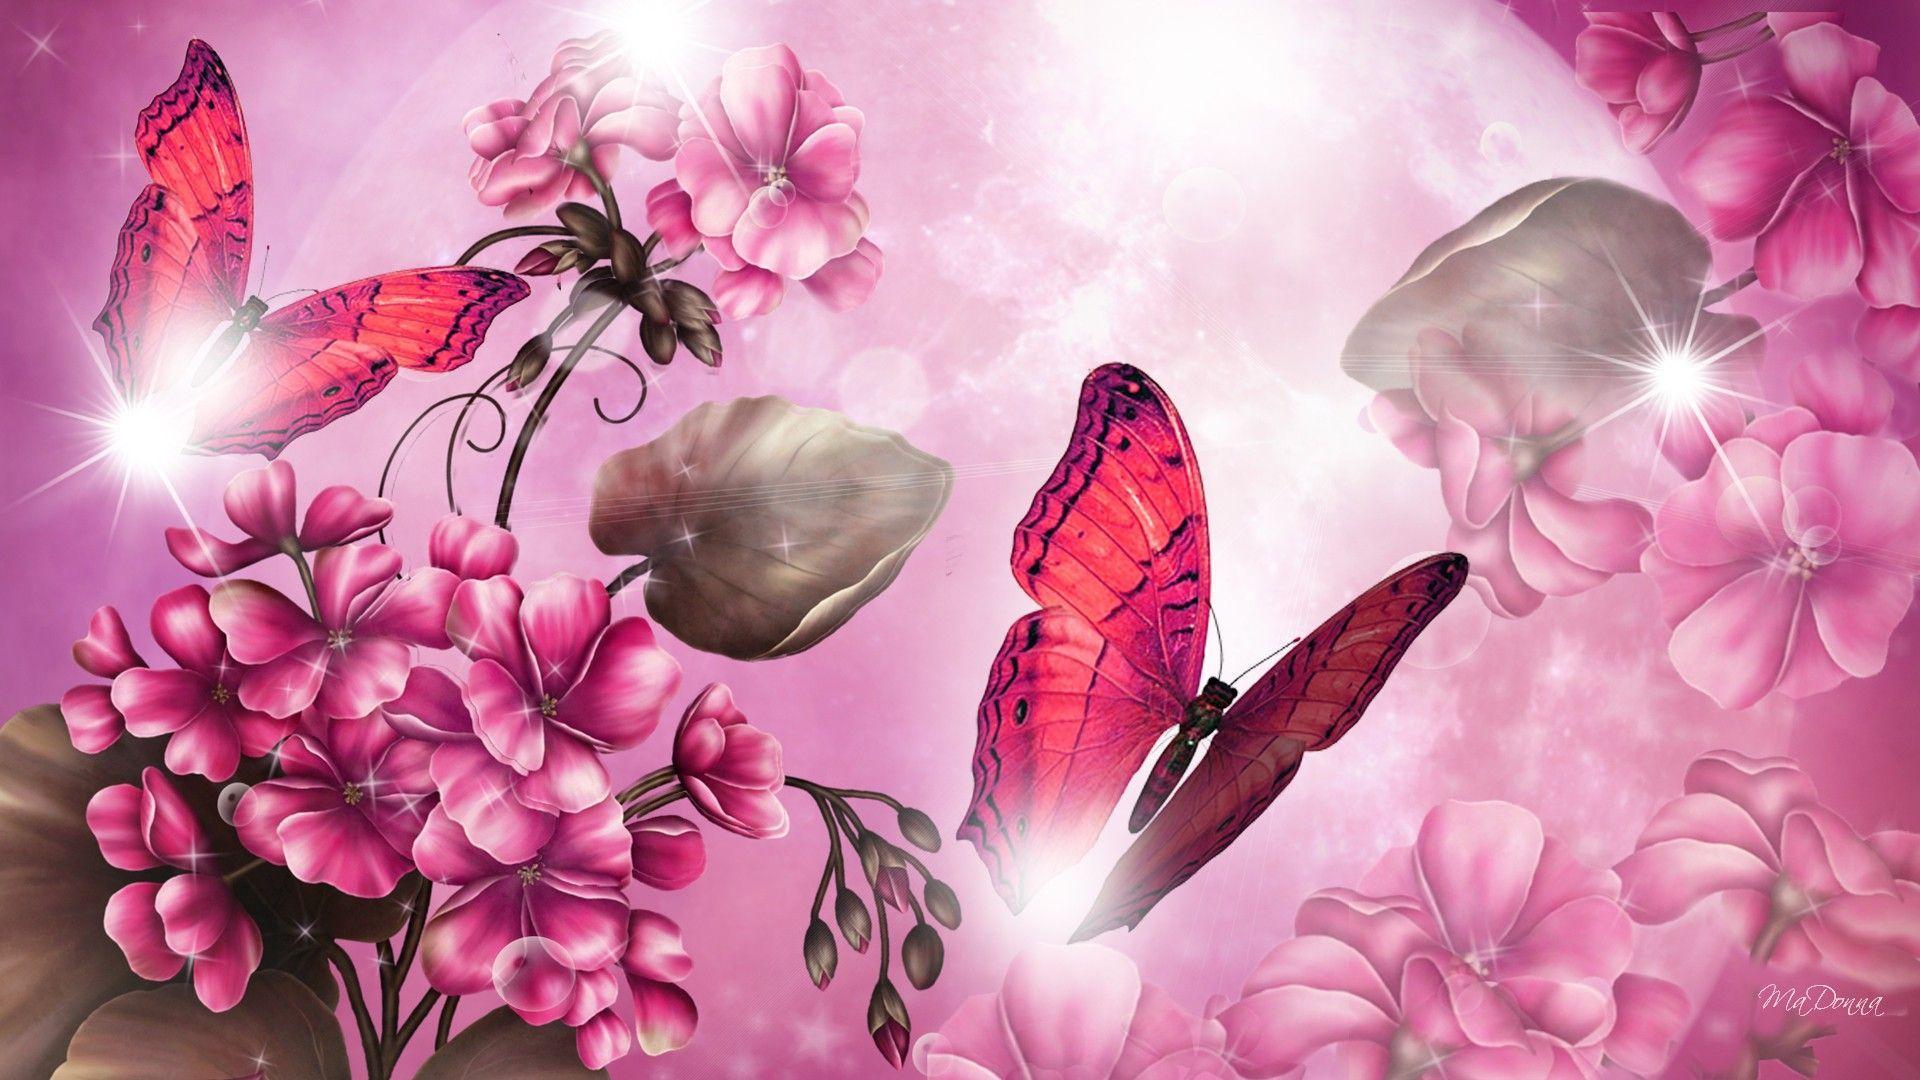 image For > Glitter Butterfly Background. wallpaper, themes, ect